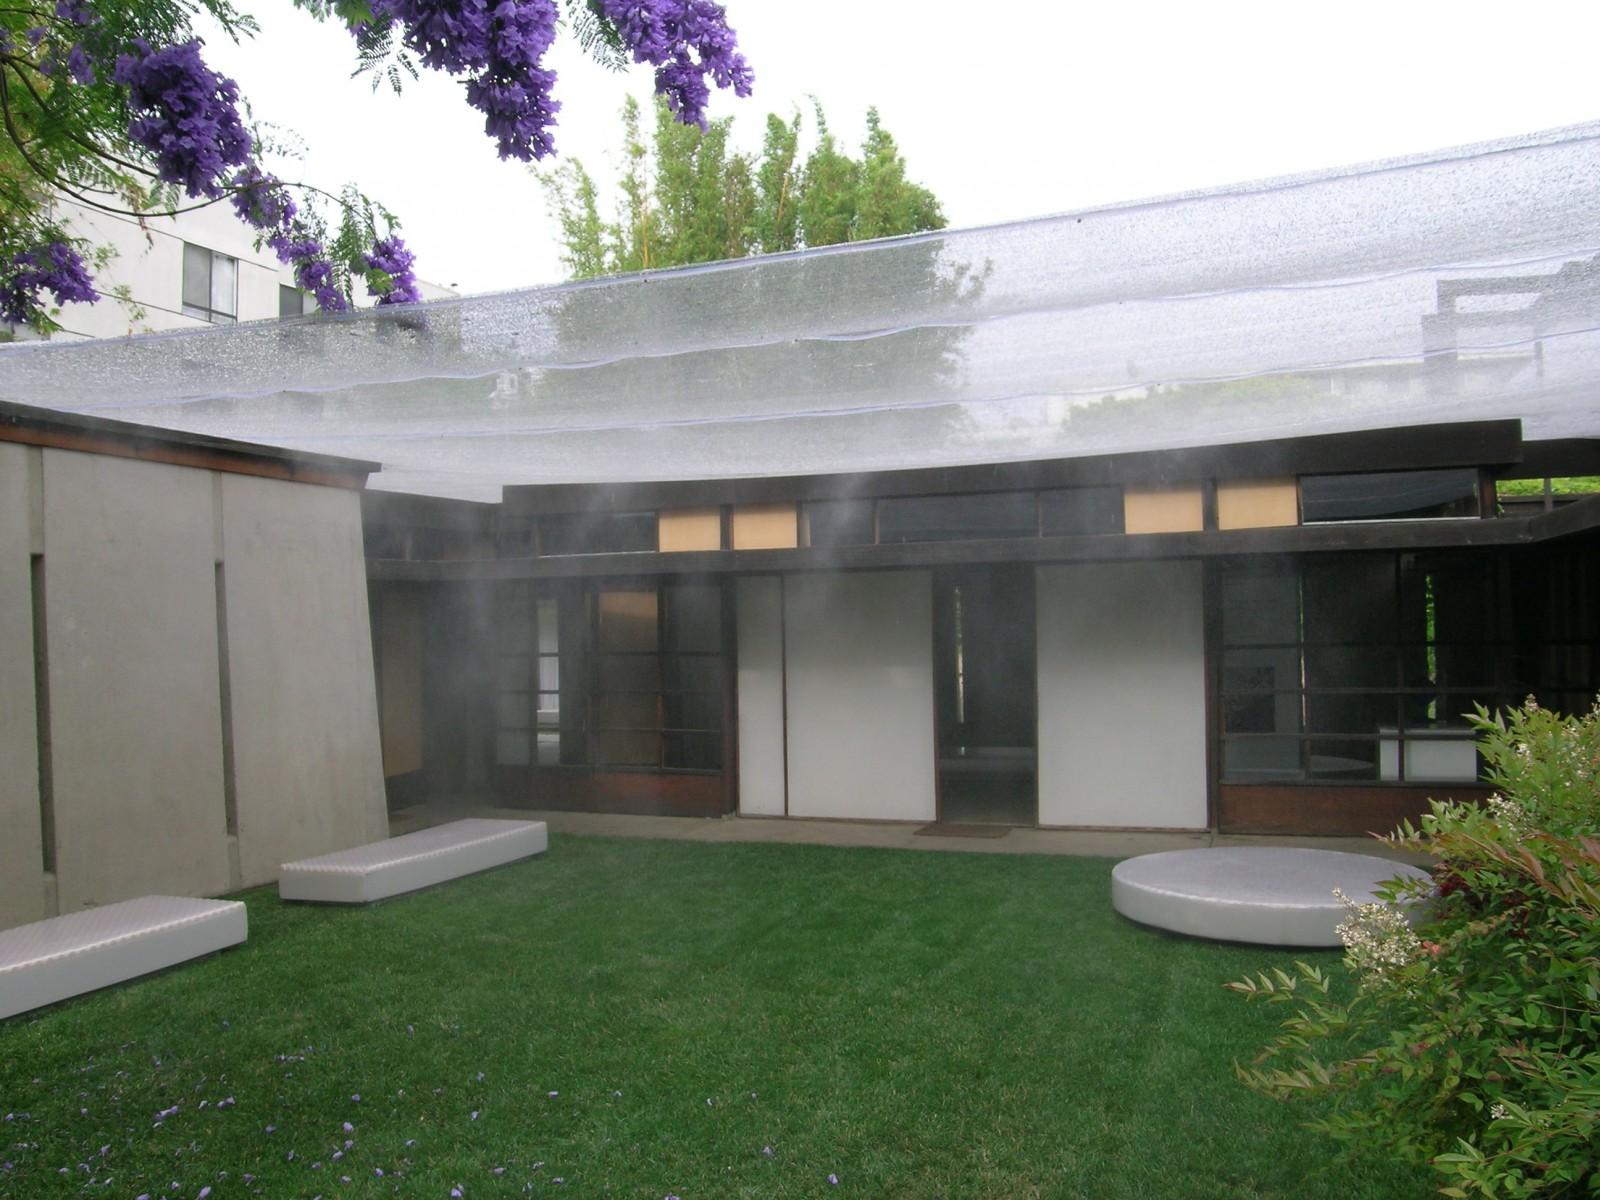 View of the exhibition, "Yves Klein Air architecture", Schindler House, 2004